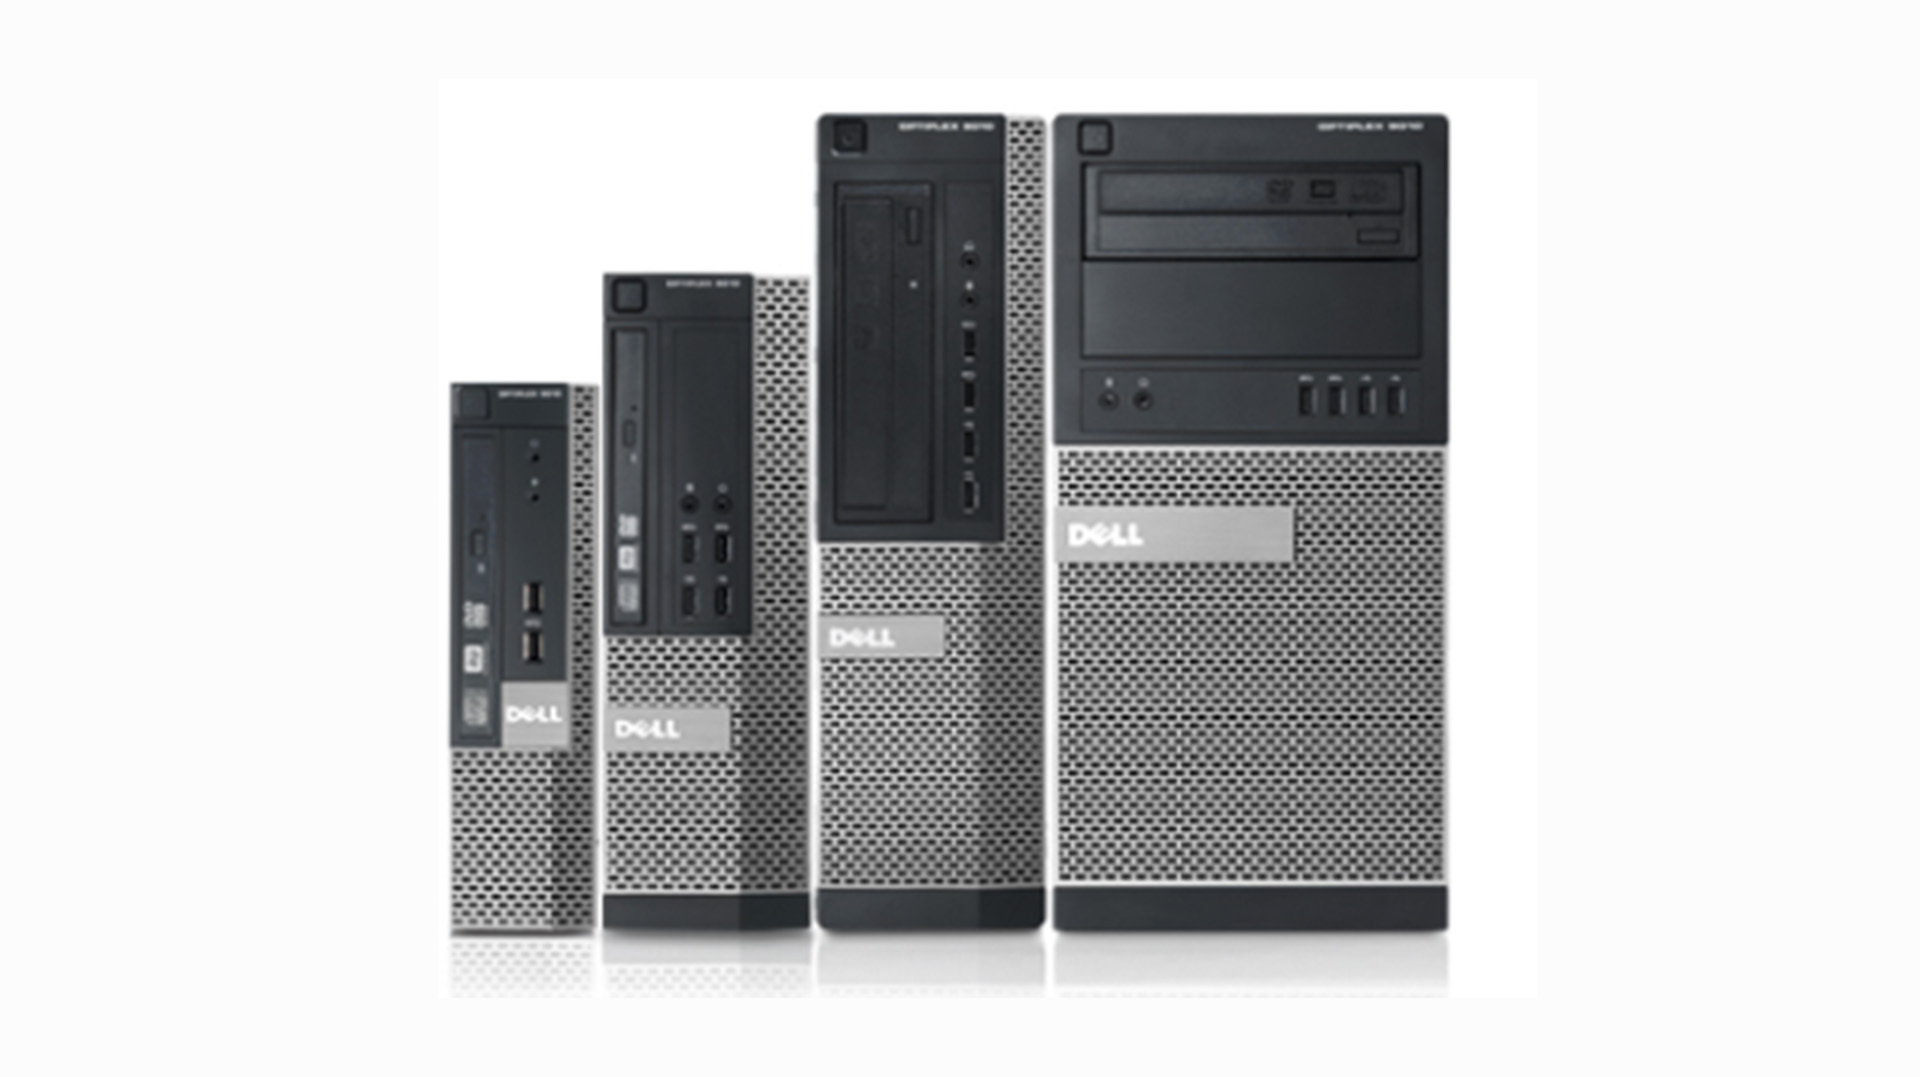 Dell OptiPlex 7040 Micro: Specs and Rack Compatibility - RackSolutions